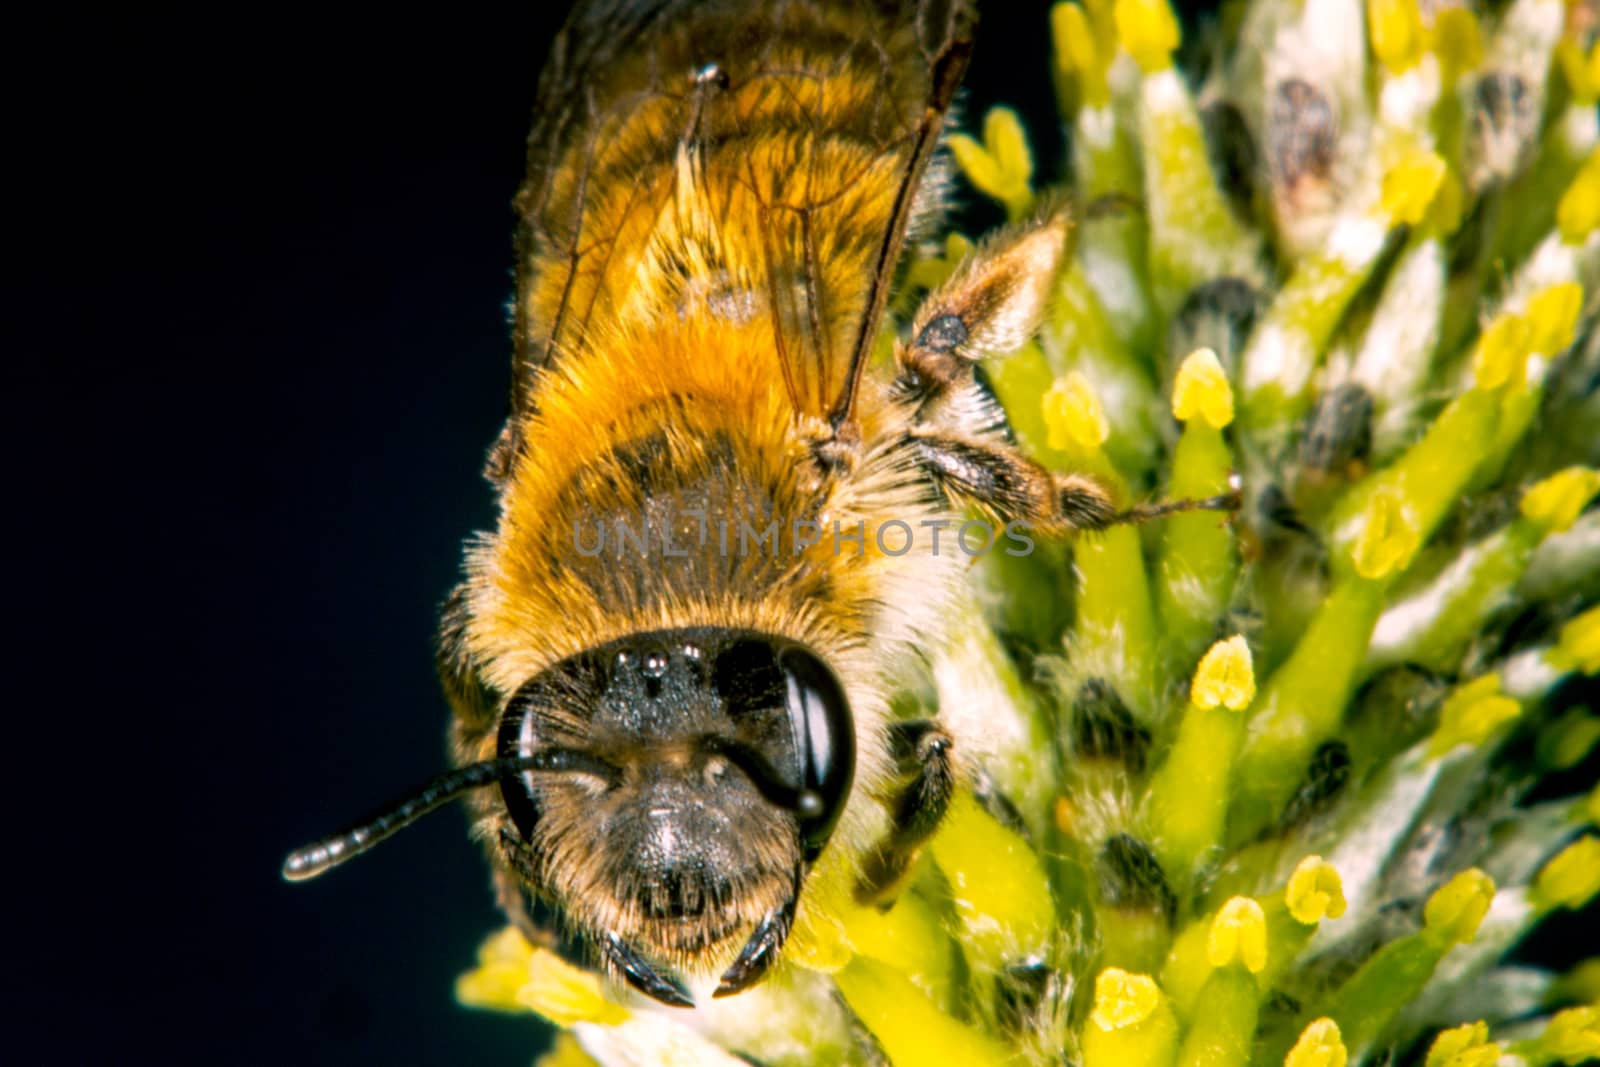 Bee Portrait by thomas_males